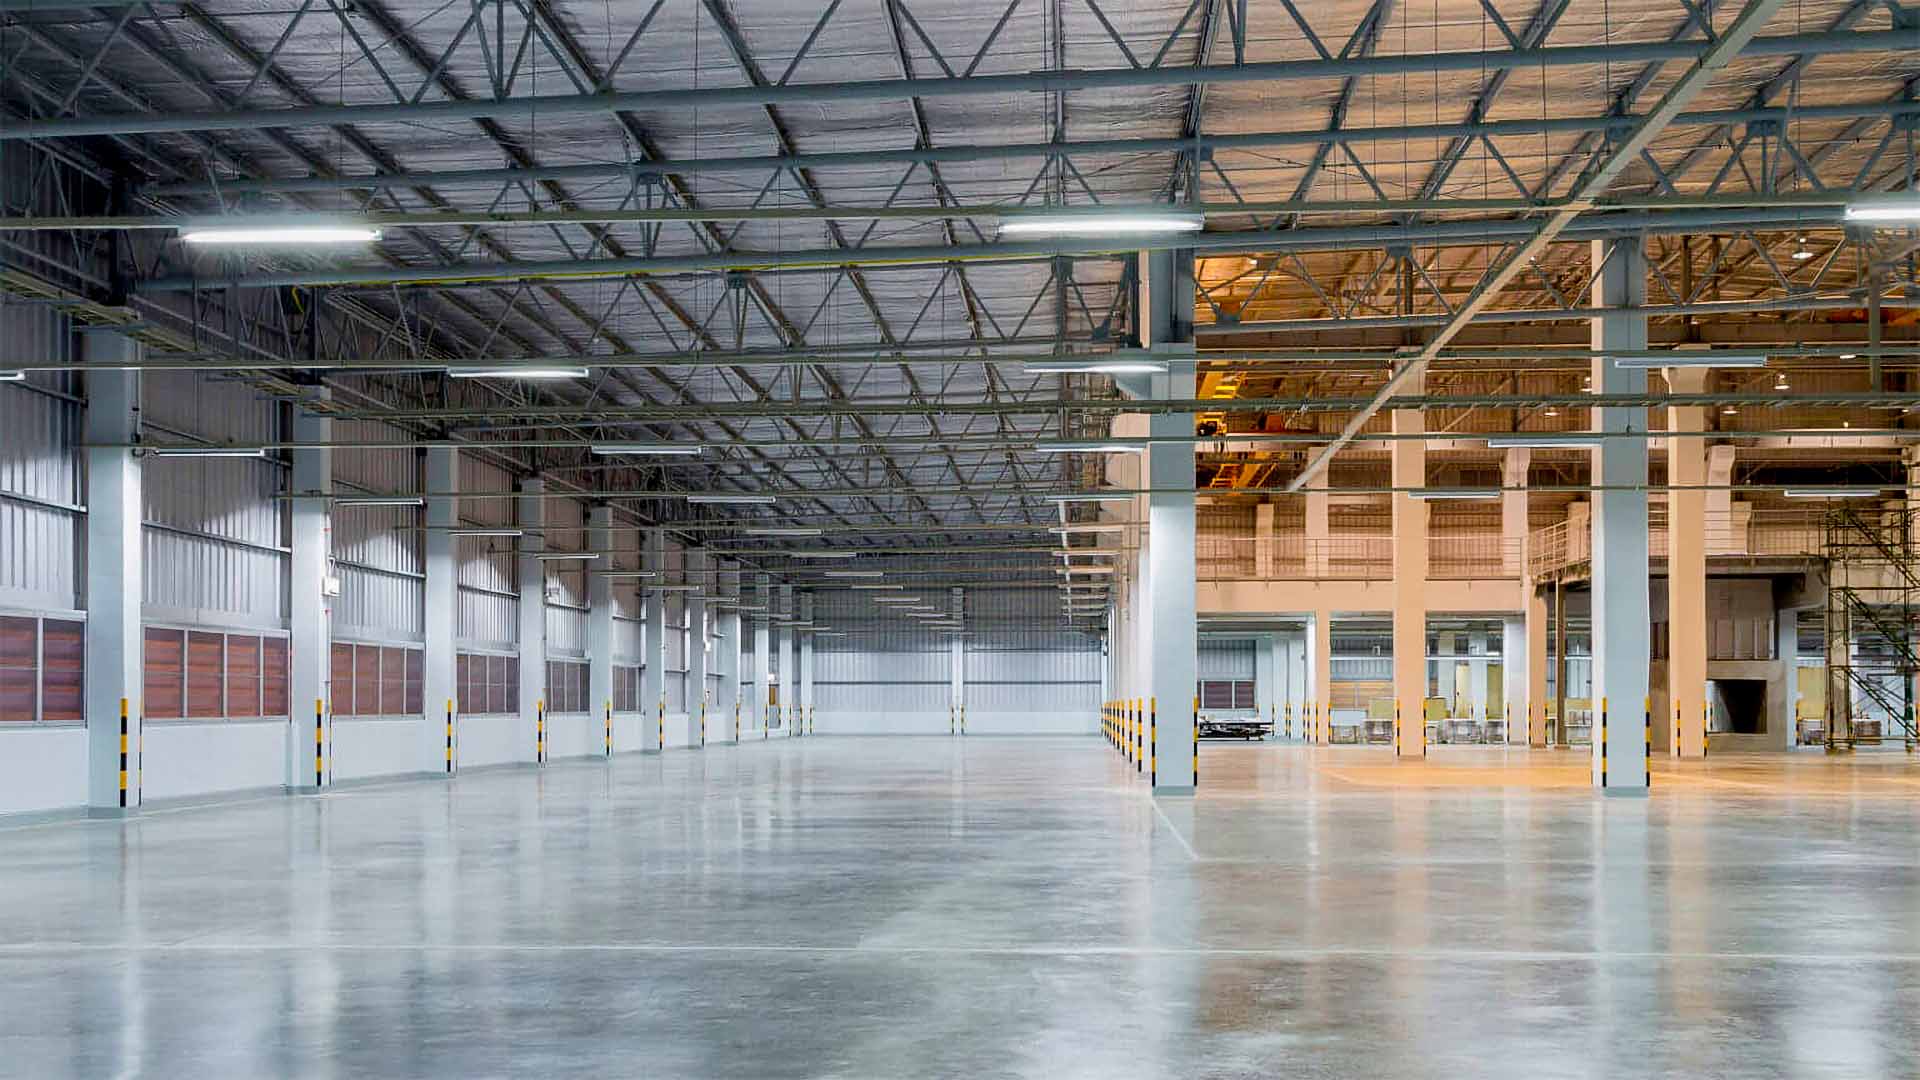 A large empty warehouse ready for a contract warehouse agreement to build out the operations